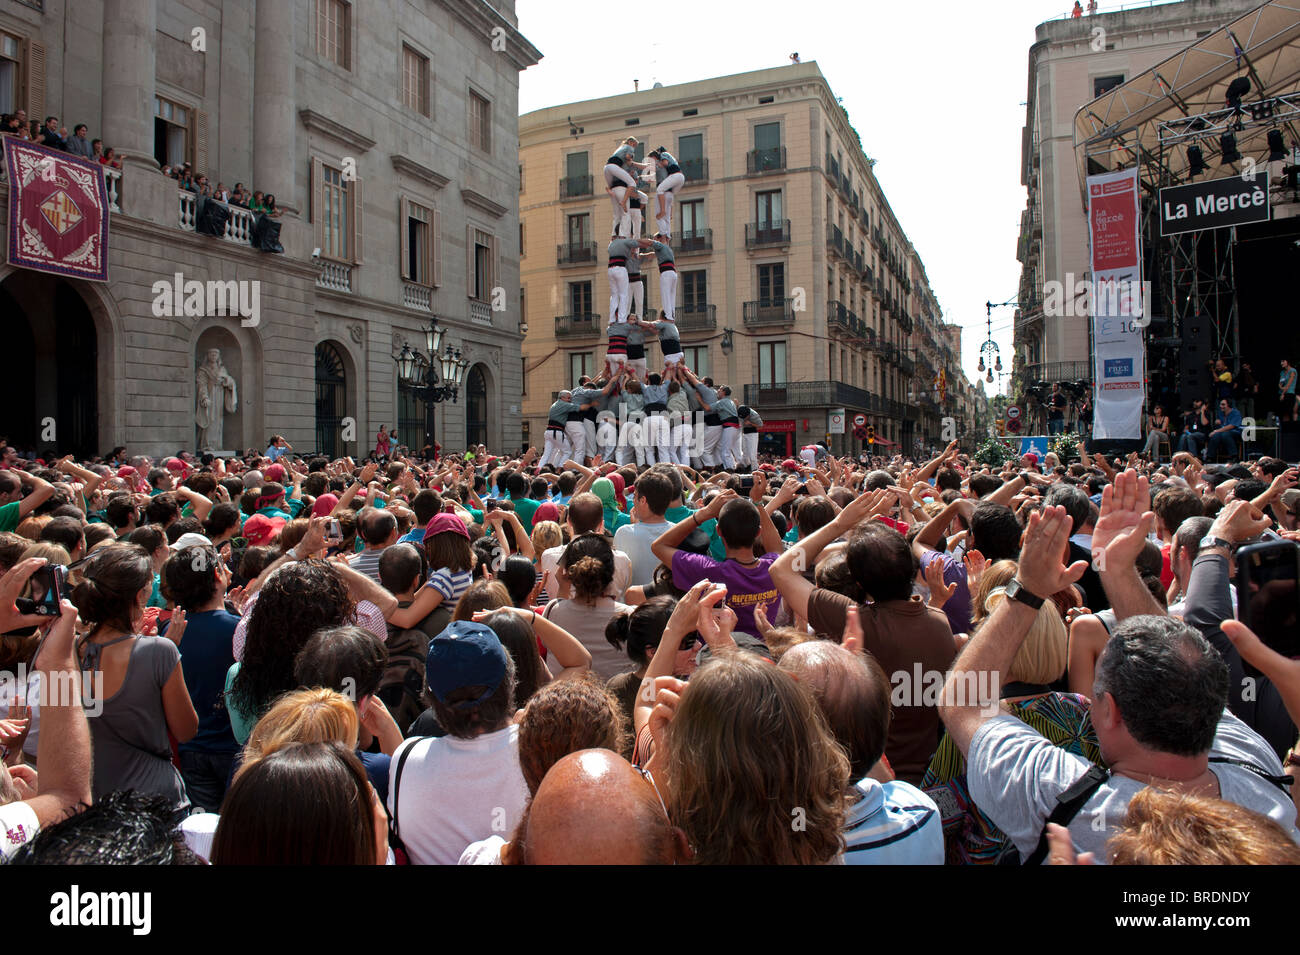 Human Castles, Castellers at St.Jaume Square for La Merce Festival in Barcelona, Catalonia, Spain 2010. Stock Photo